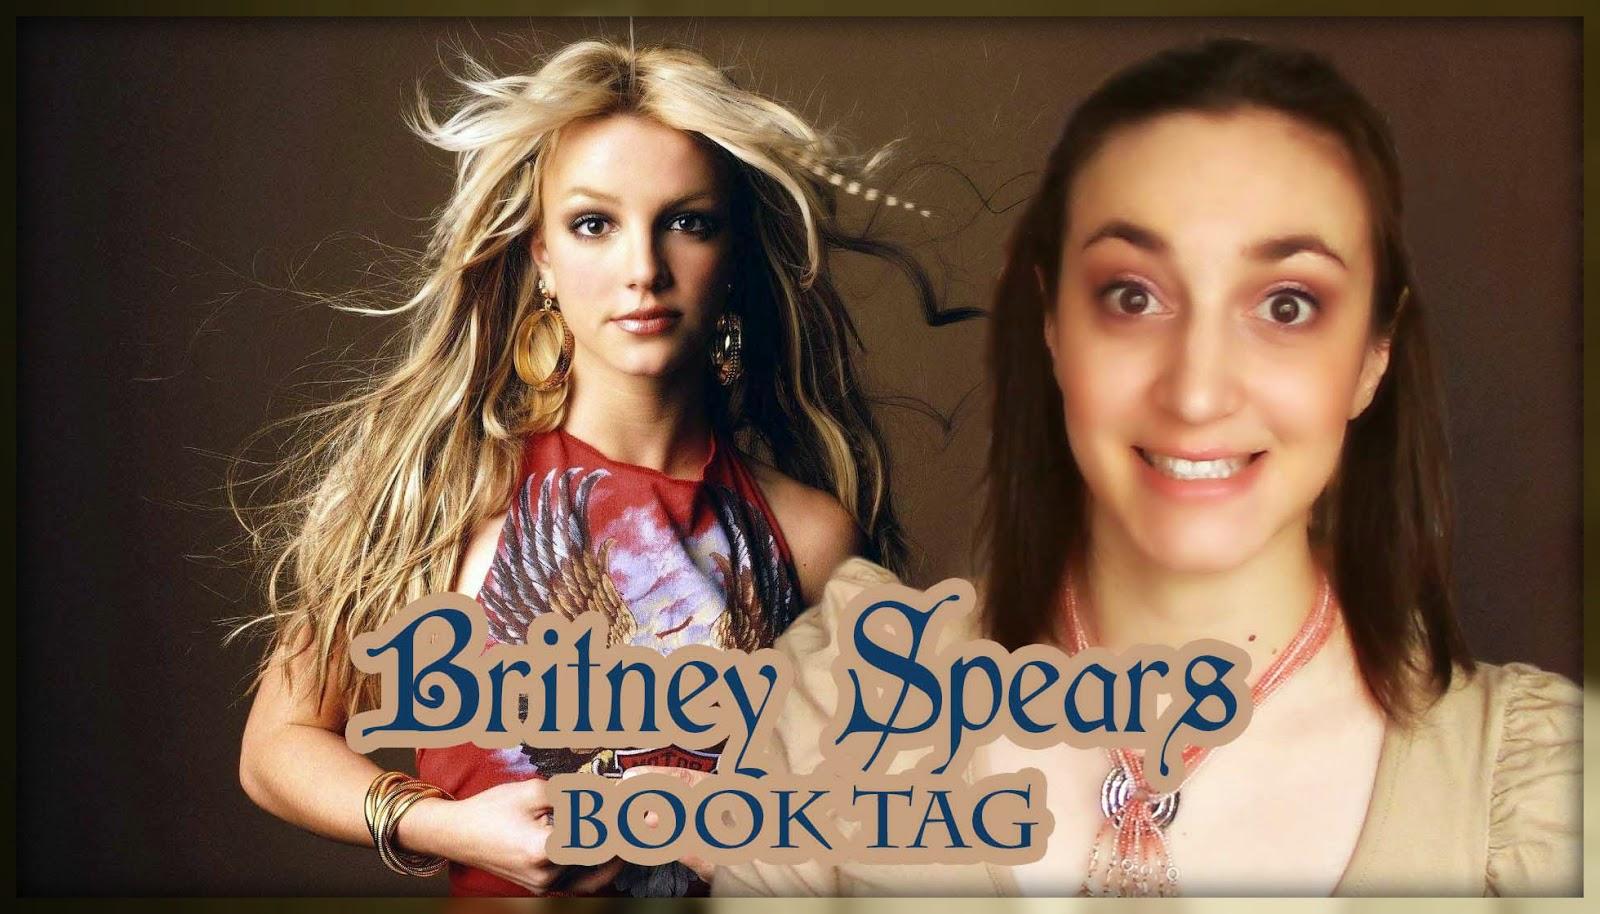 [Tag] The Britney Spears Book Tag | French Edition